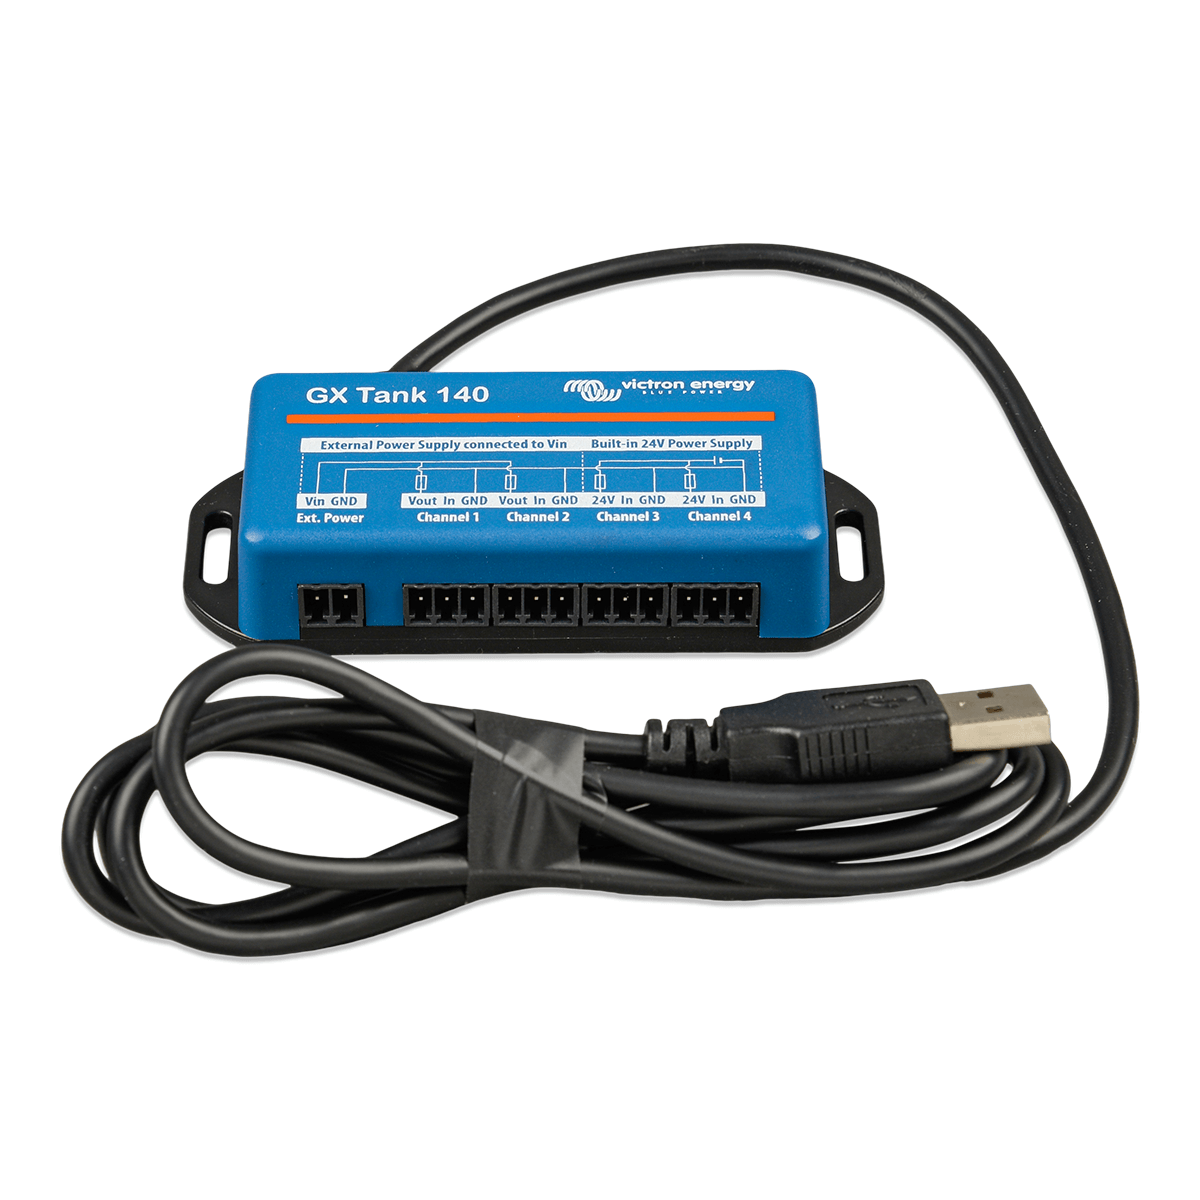 The Victron GX Tank 140 - Voltage Sensor for Tank Level Monitoring, featuring multiple ports and a connected USB cable, is designed for seamlessly monitoring tank levels.